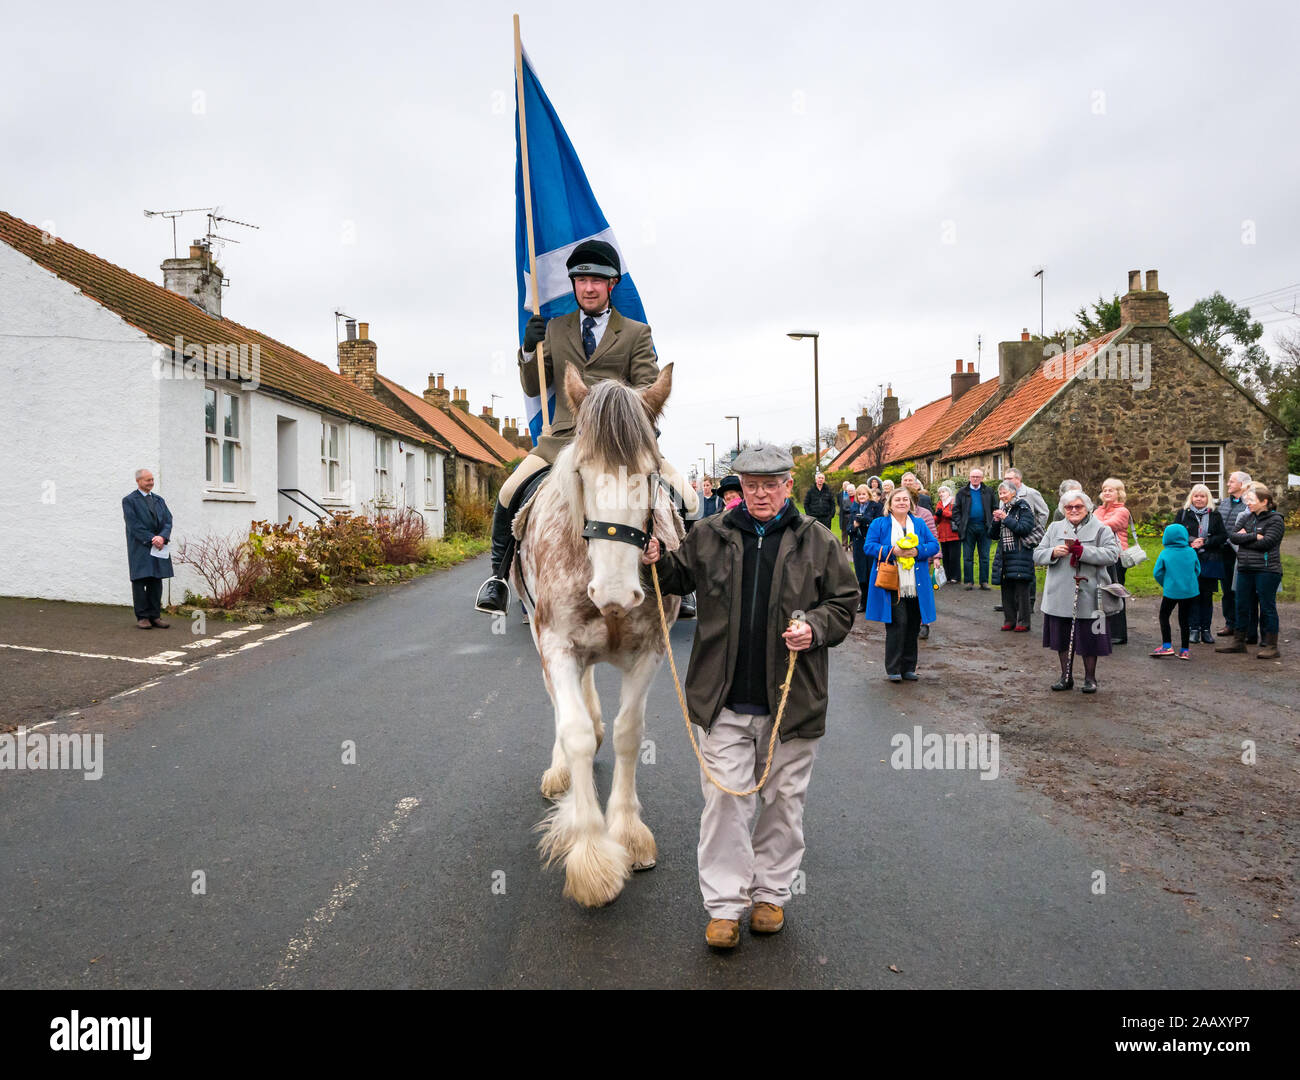 Athelstaneford, East Lothian, Scotland, UK. 24 November 2019. Saltire Festival: The first day of the annual festival to mark St Andrew’s Day takes place in the birthplace of the Scottish national flag where the saltire appeared in the sky as a good omen when the Picts & Scots defeated the Saxons led by Athelstan. Pictured: Craig Donnelly on a Strawberry Roan Clydesdale mare with groom/owner Arthur Greenan with villagers parading along the main street Stock Photo